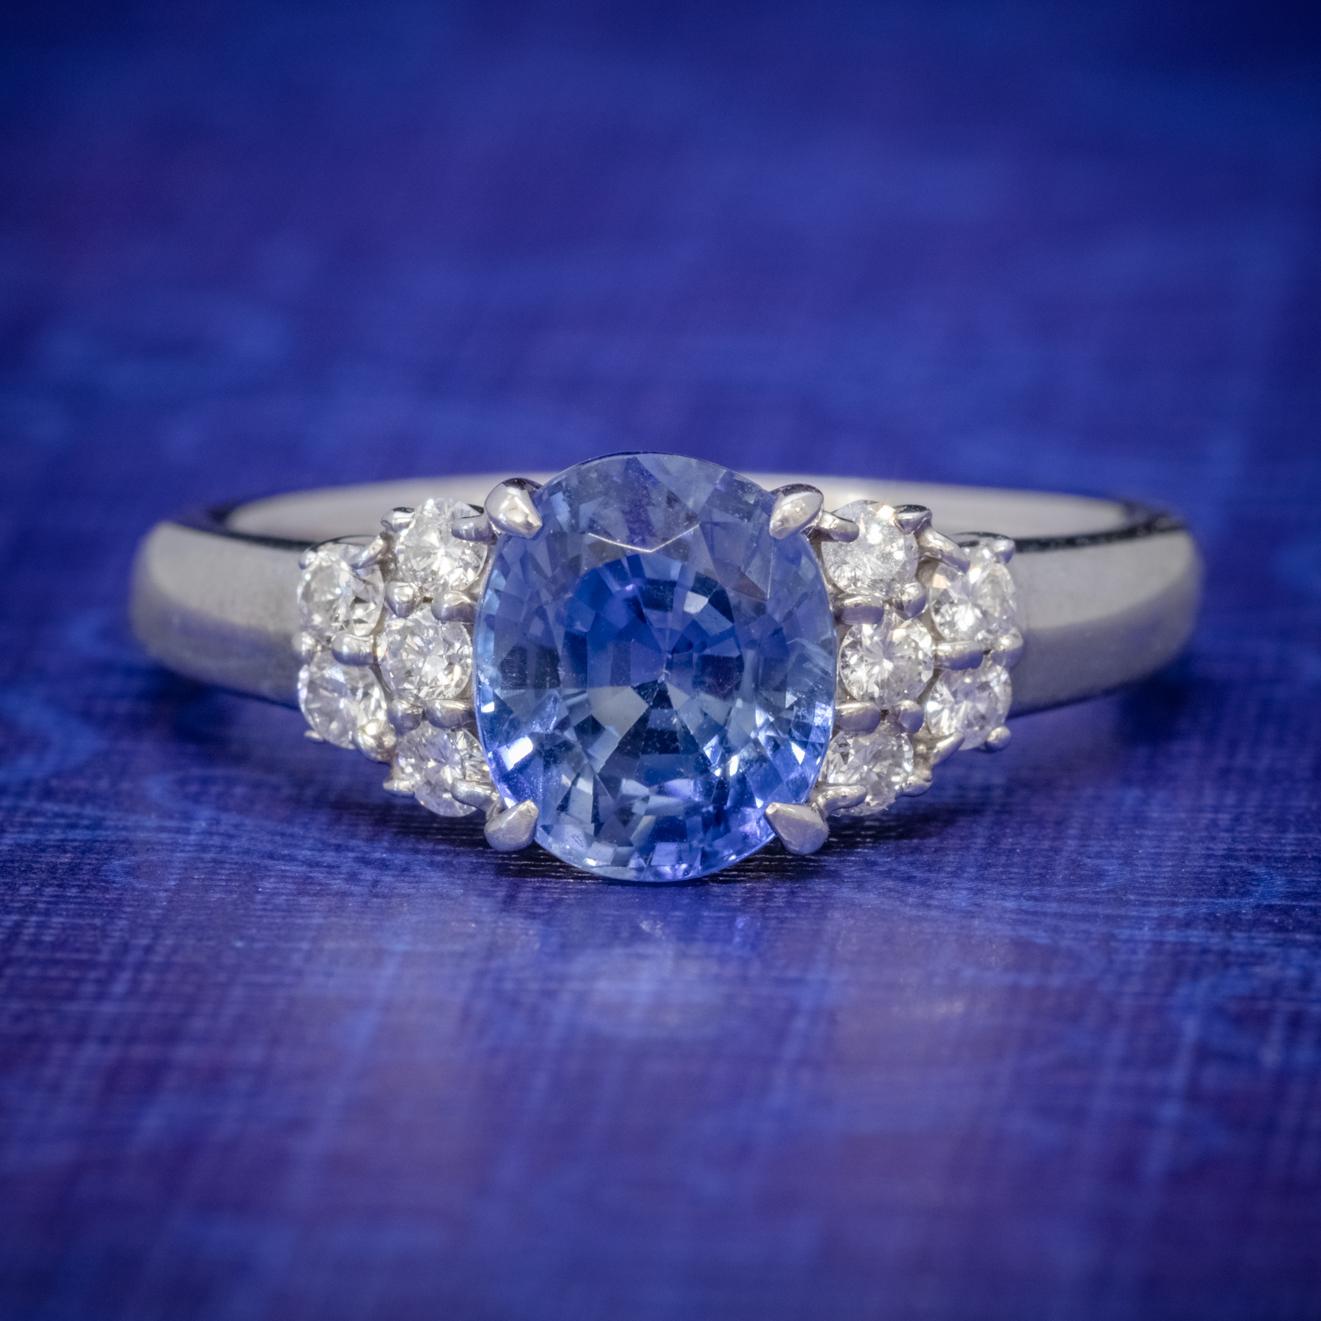 This elegant Vintage ring is modelled in solid Platinum and boasts a vibrant, royal blue, Ceylon Sapphire weighing 2.50ct and flanked by five sparkling brilliant cut Diamonds on each shoulder.

Ceylon Sapphires are adored for their vivid blue